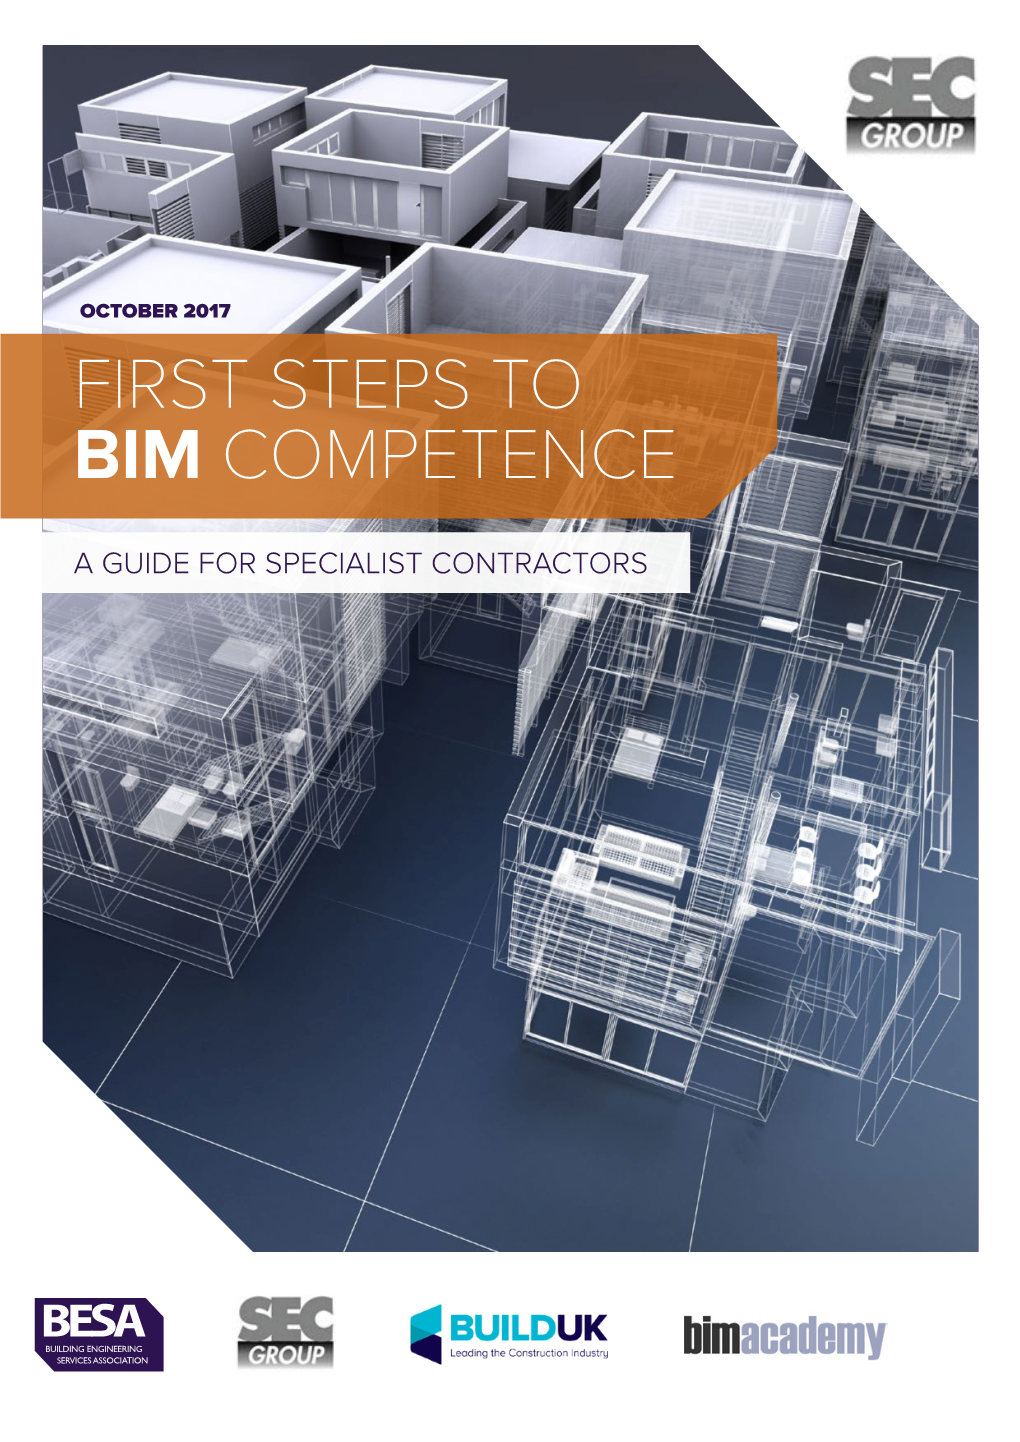 First Steps to Bim Competence